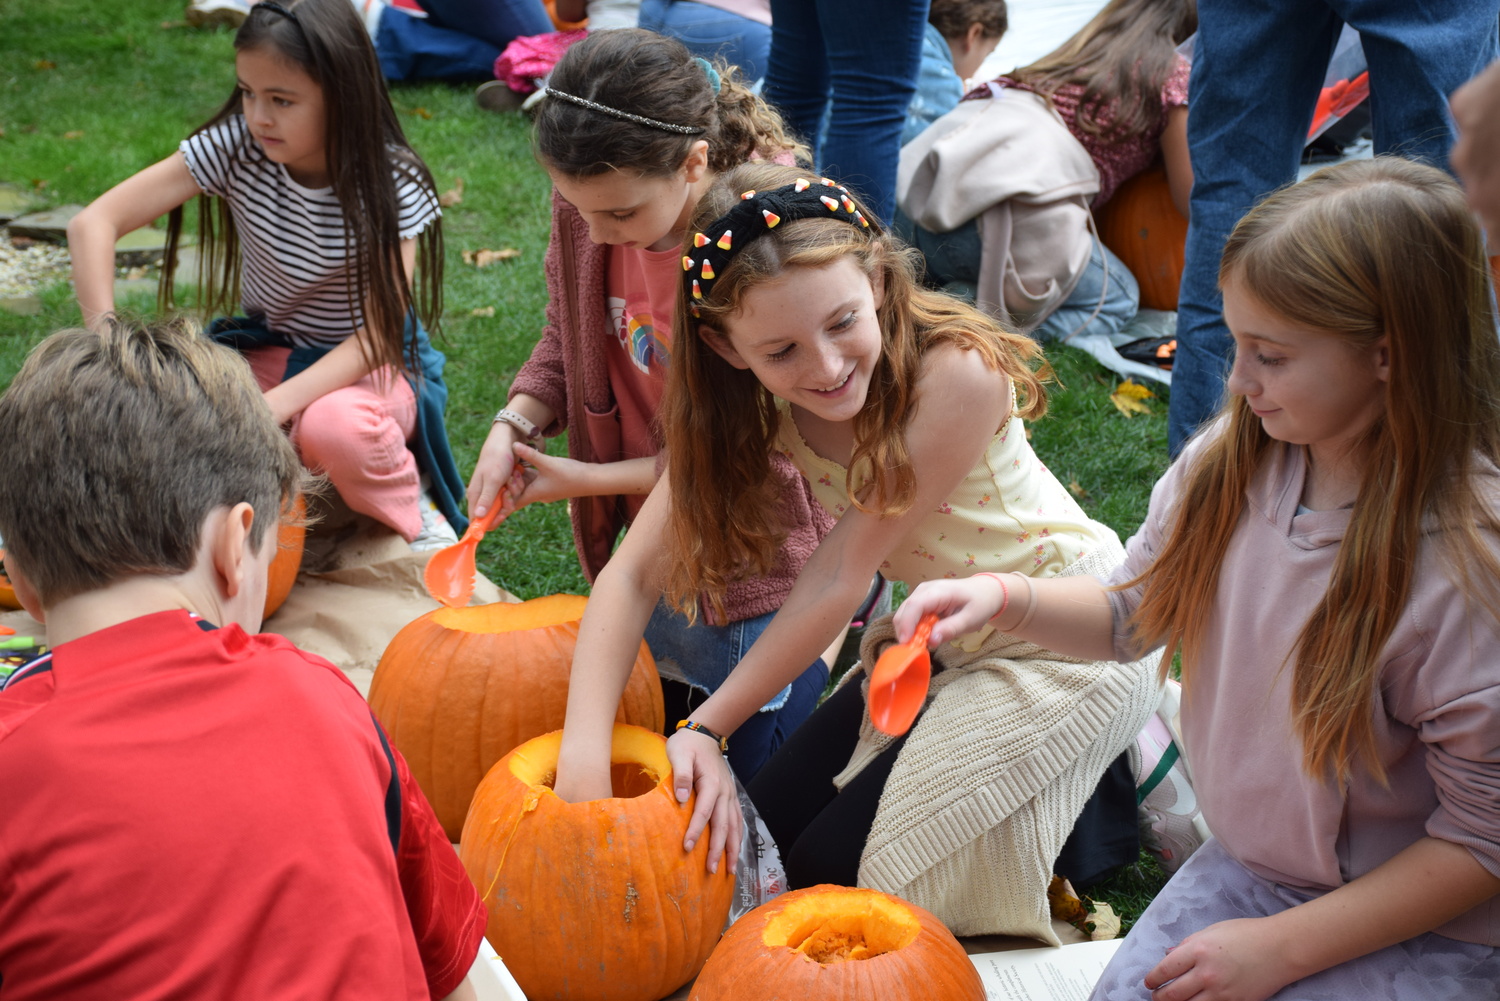 Sag Harbor Elementary School’s fourth grade class recently walked to the Sag Harbor Historical Society for a tour of the Annie Cooper Boyd House and to carve pumpkins
for the annual Halloween light up. Greeted by the Historical Society’s president, Nancy
French, and other board members, the students, alongside class parents, were creative with
their festive pumpkin carving. The pumpkins were lit that very night on the Historical
Society porch for all of Sag Harbor community to see. COURTESY SAG HARBOR SCHOOL DISTRICT